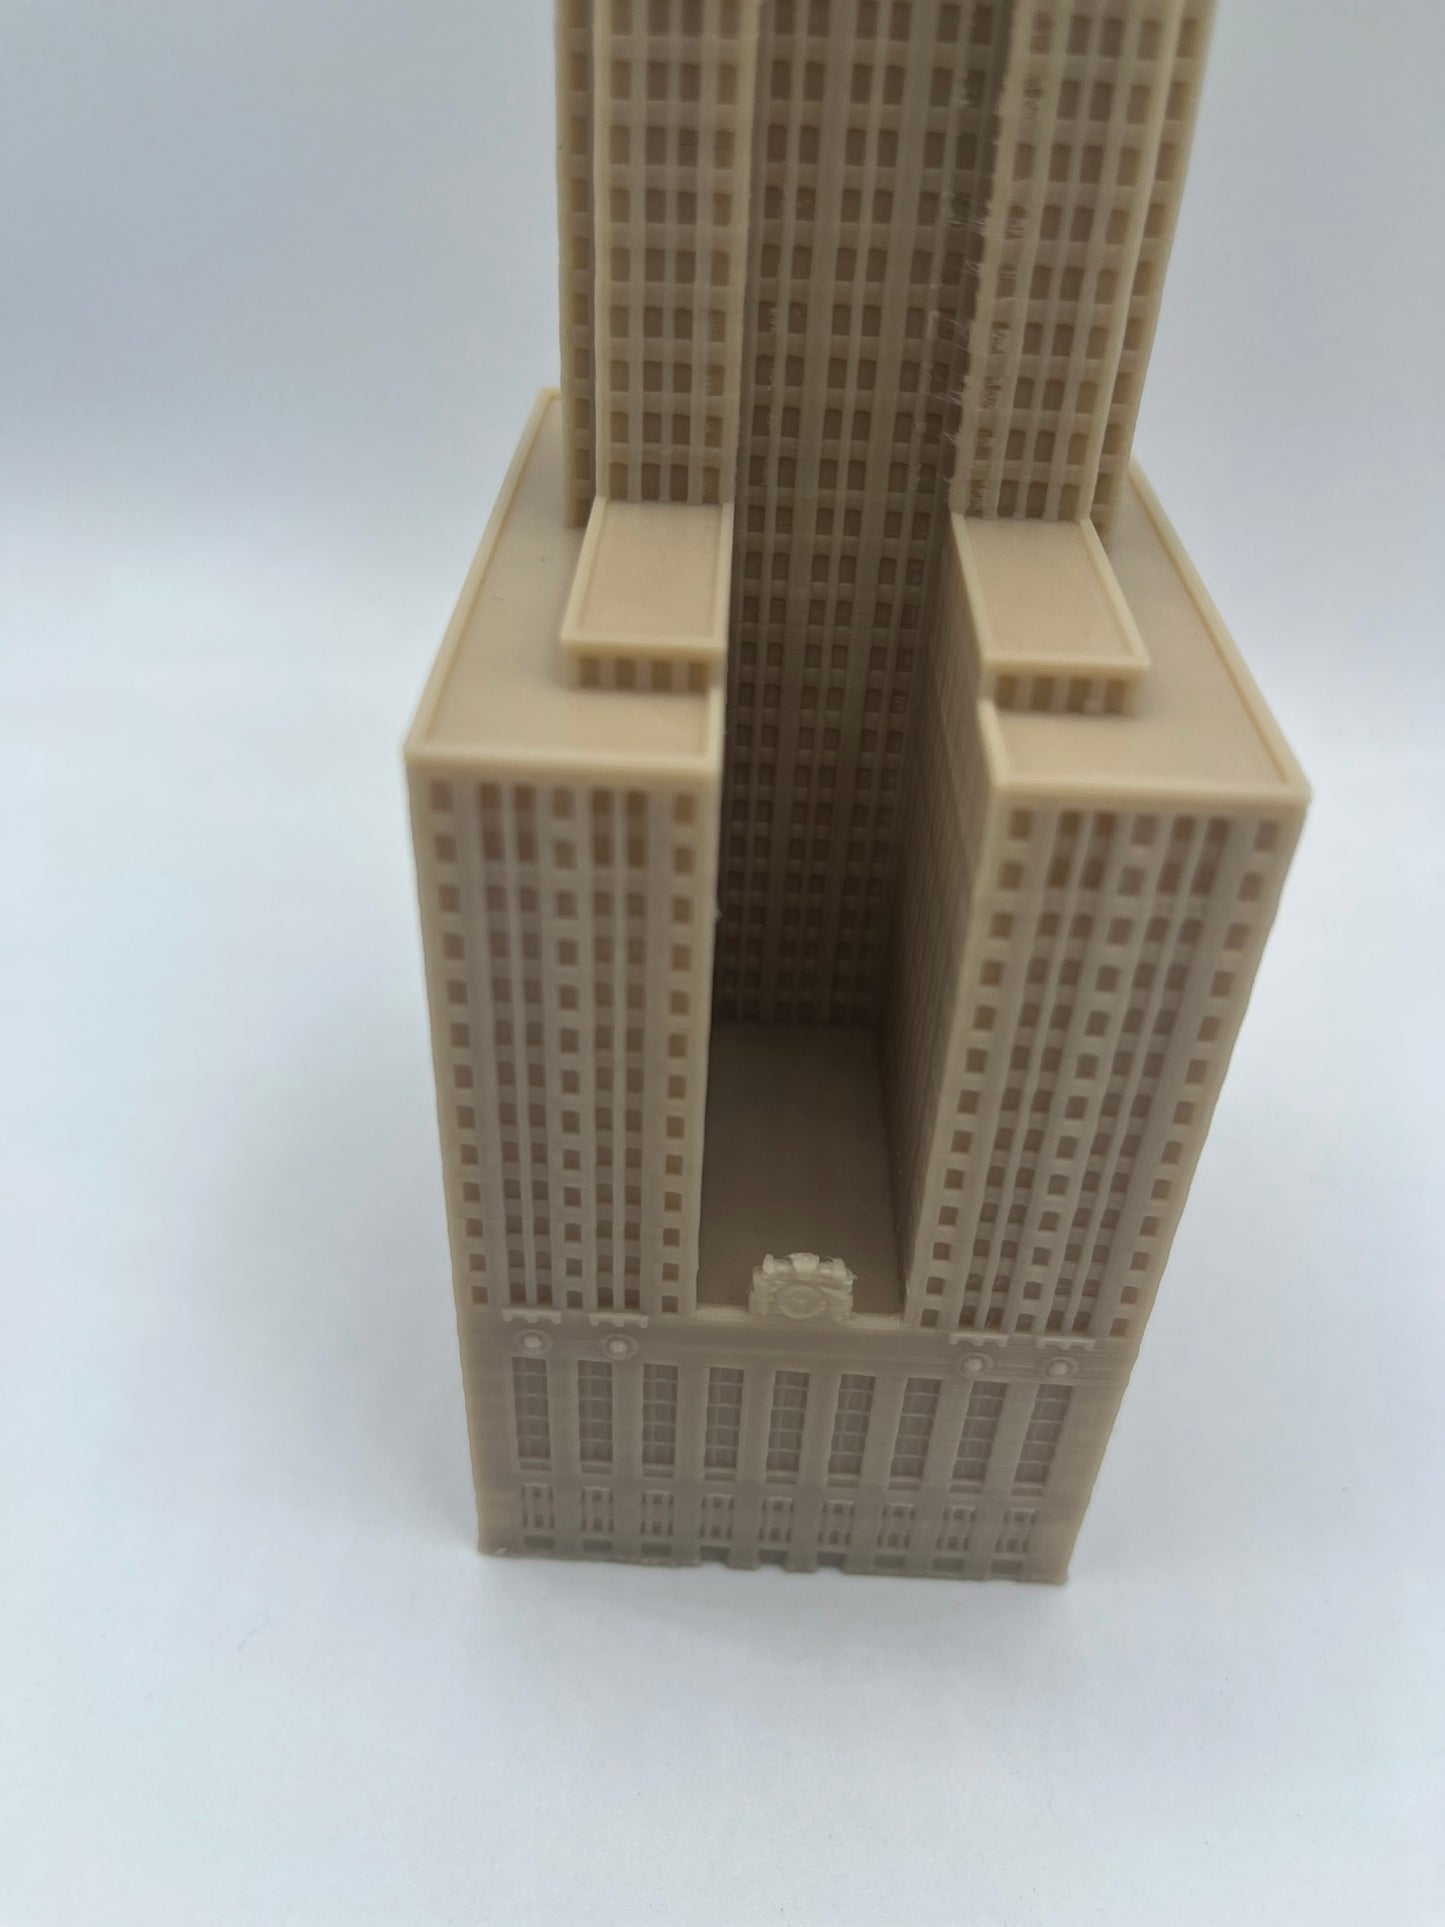 Chicago Board of Trade Building Model- 3D Printed